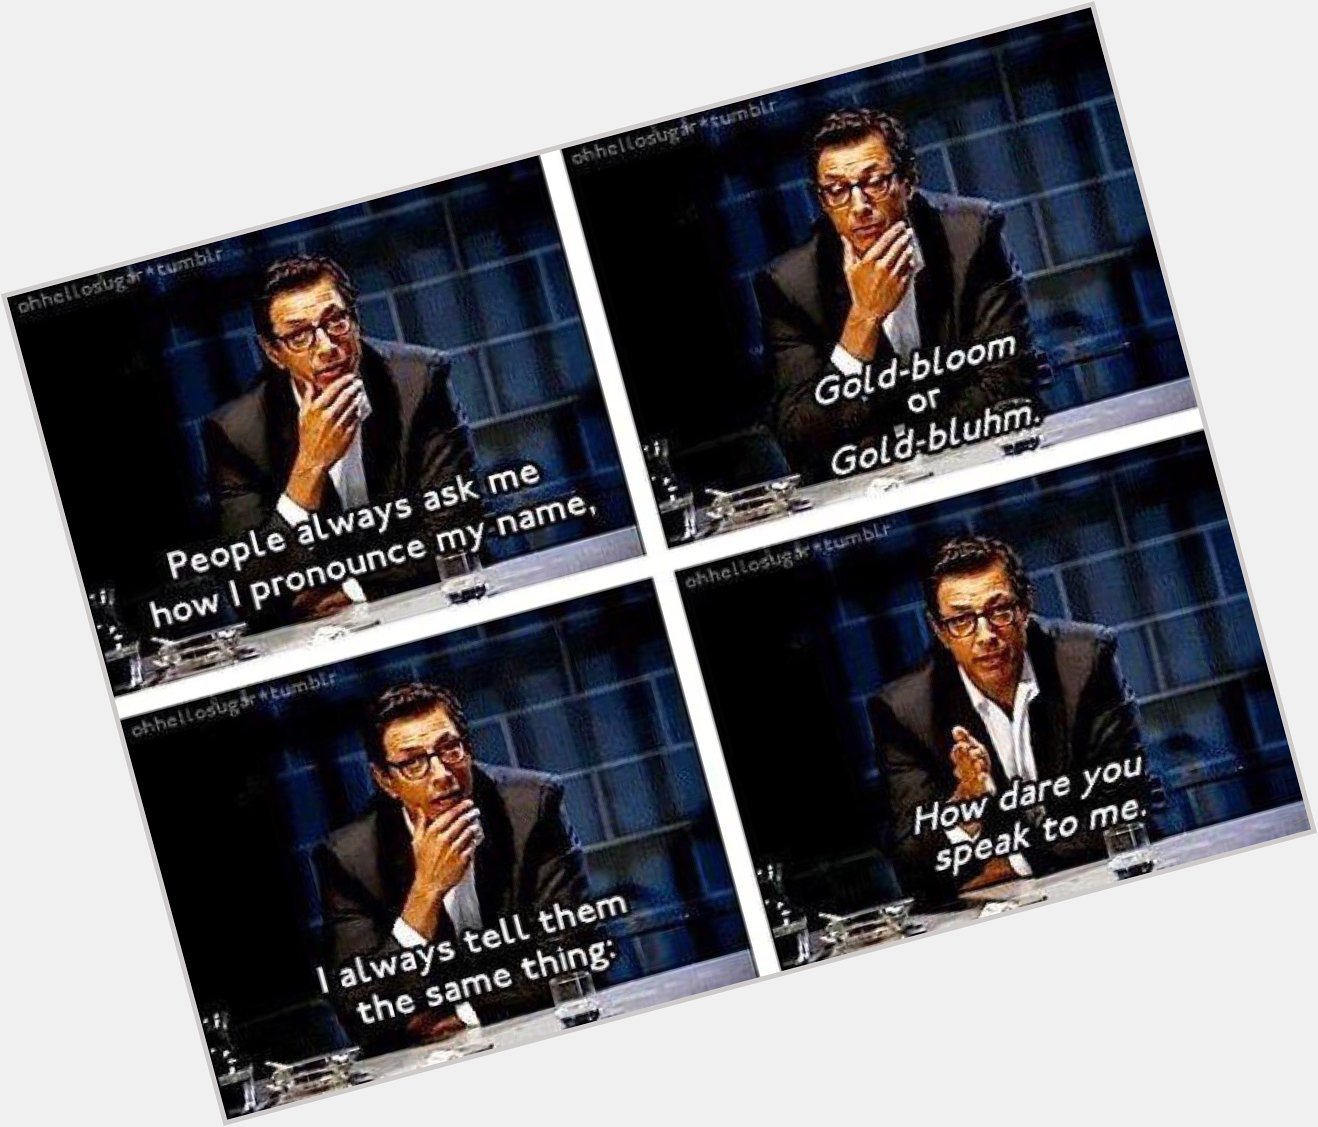 I m wishing a very Happy Birthday to my fellow Libran Jeff Goldblum, with my favourite anecdote of his: 